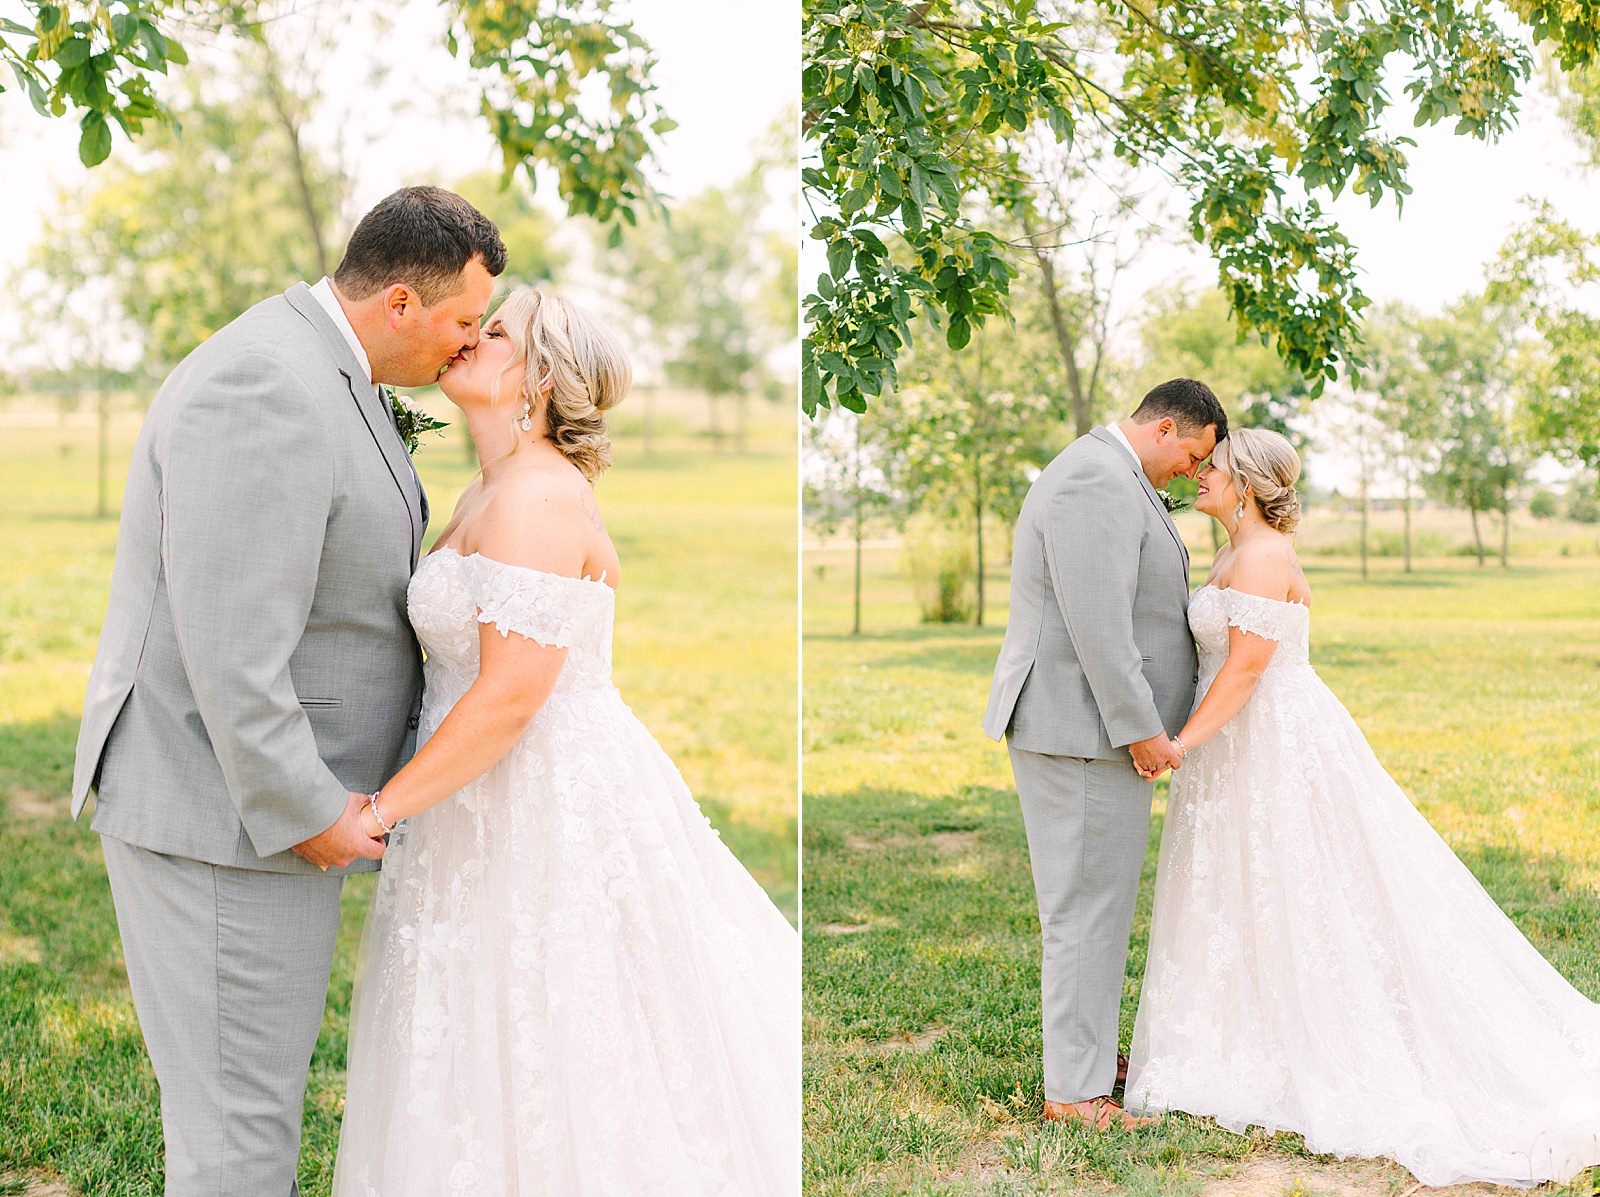 A Sunny Summer Wedding at Friedman Park in Newburgh Indiana | Paige and Dylan | Bret and Brandie Photography067.jpg